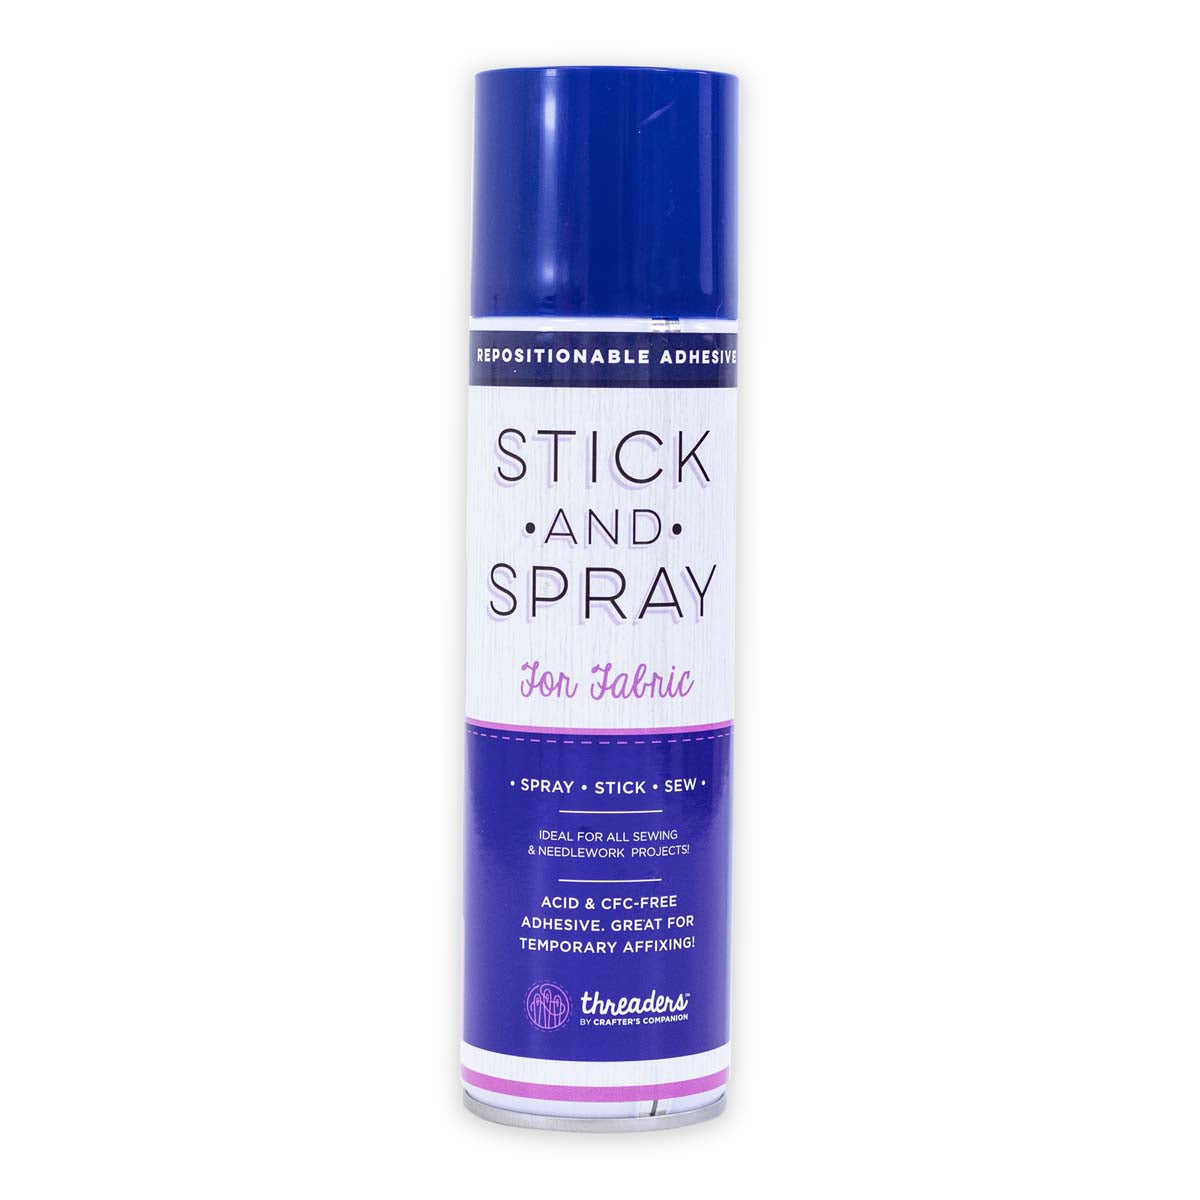 Crafter's Companion - Stick and Spray Adhesive For Fabric - Repositionable (DARK BLUE CAN)